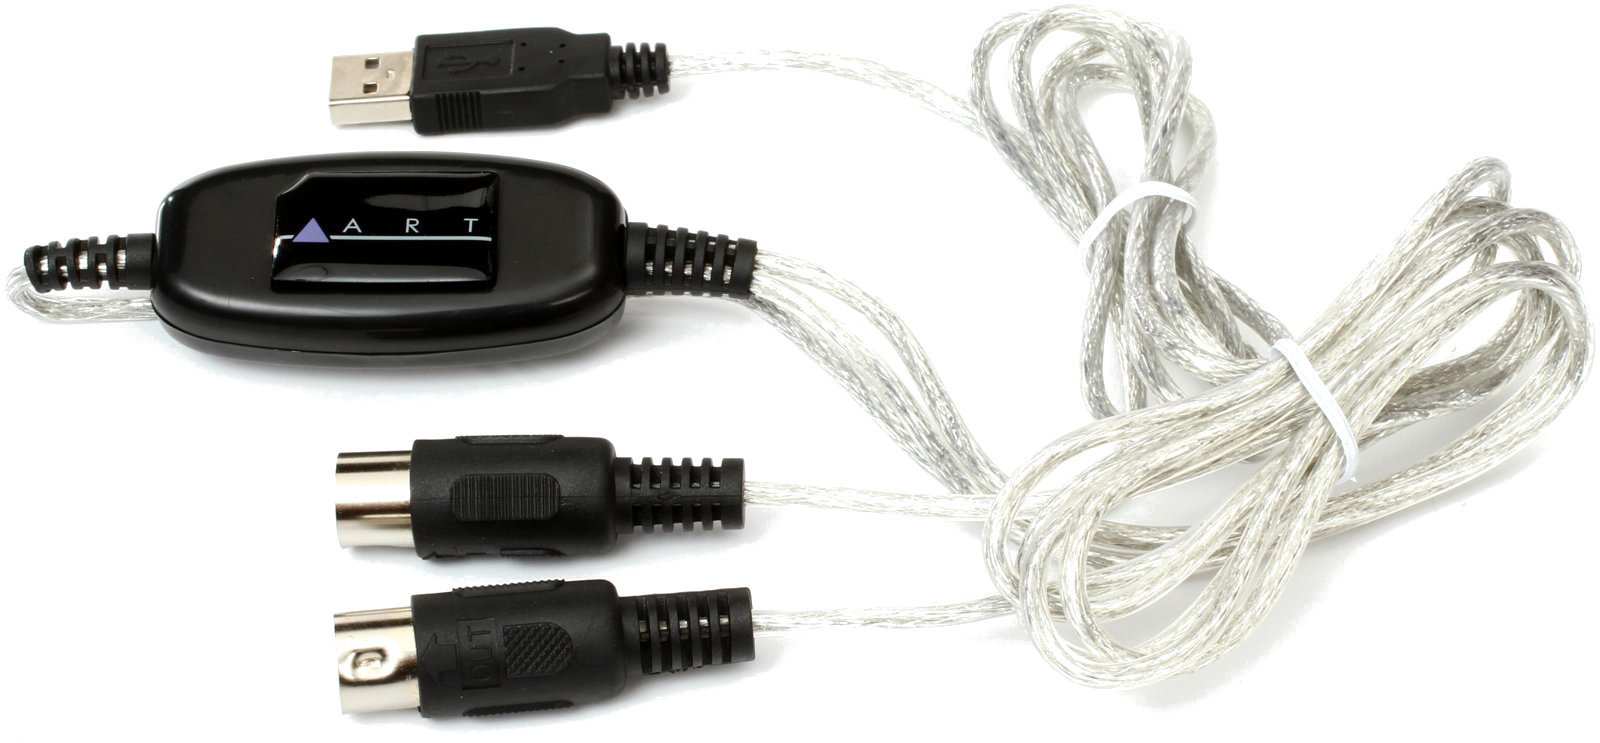 USB Audio Interface ART Mconnect USB-To-MIDI Cable